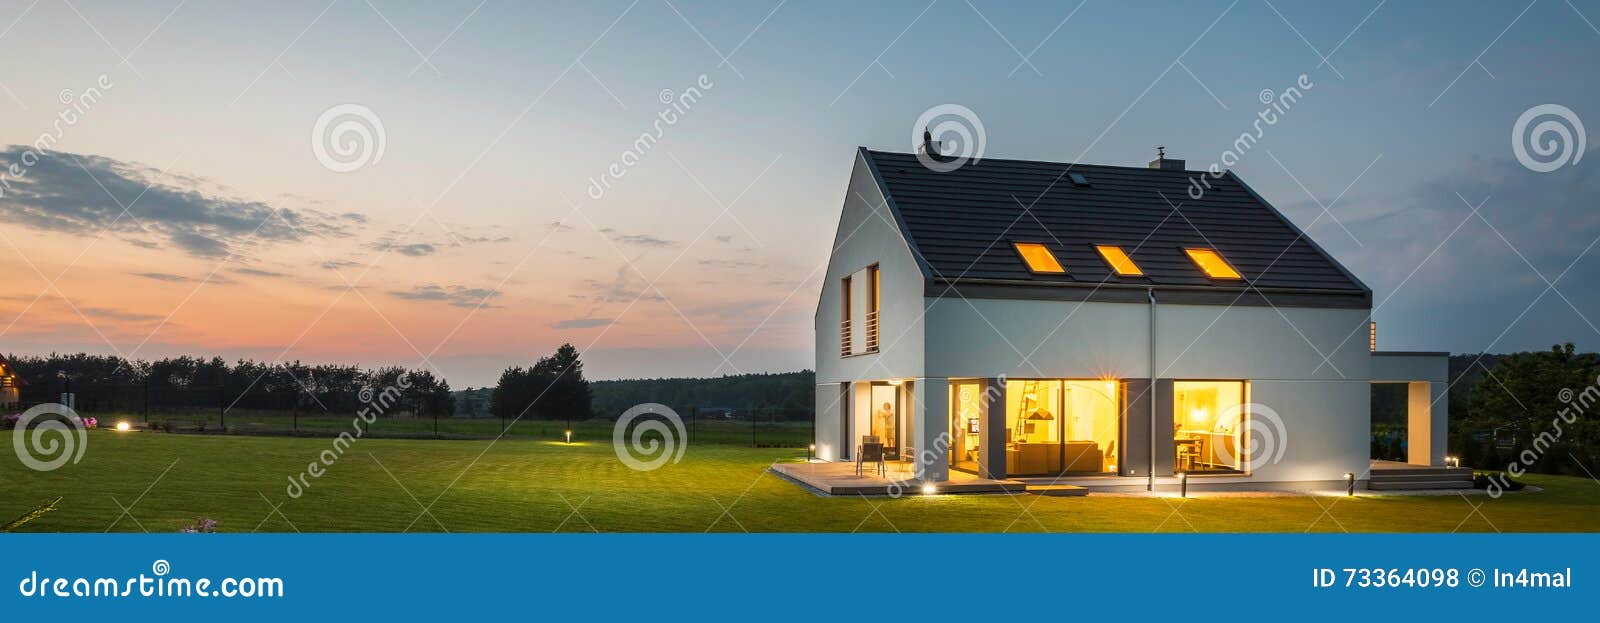 modern house with garden at night